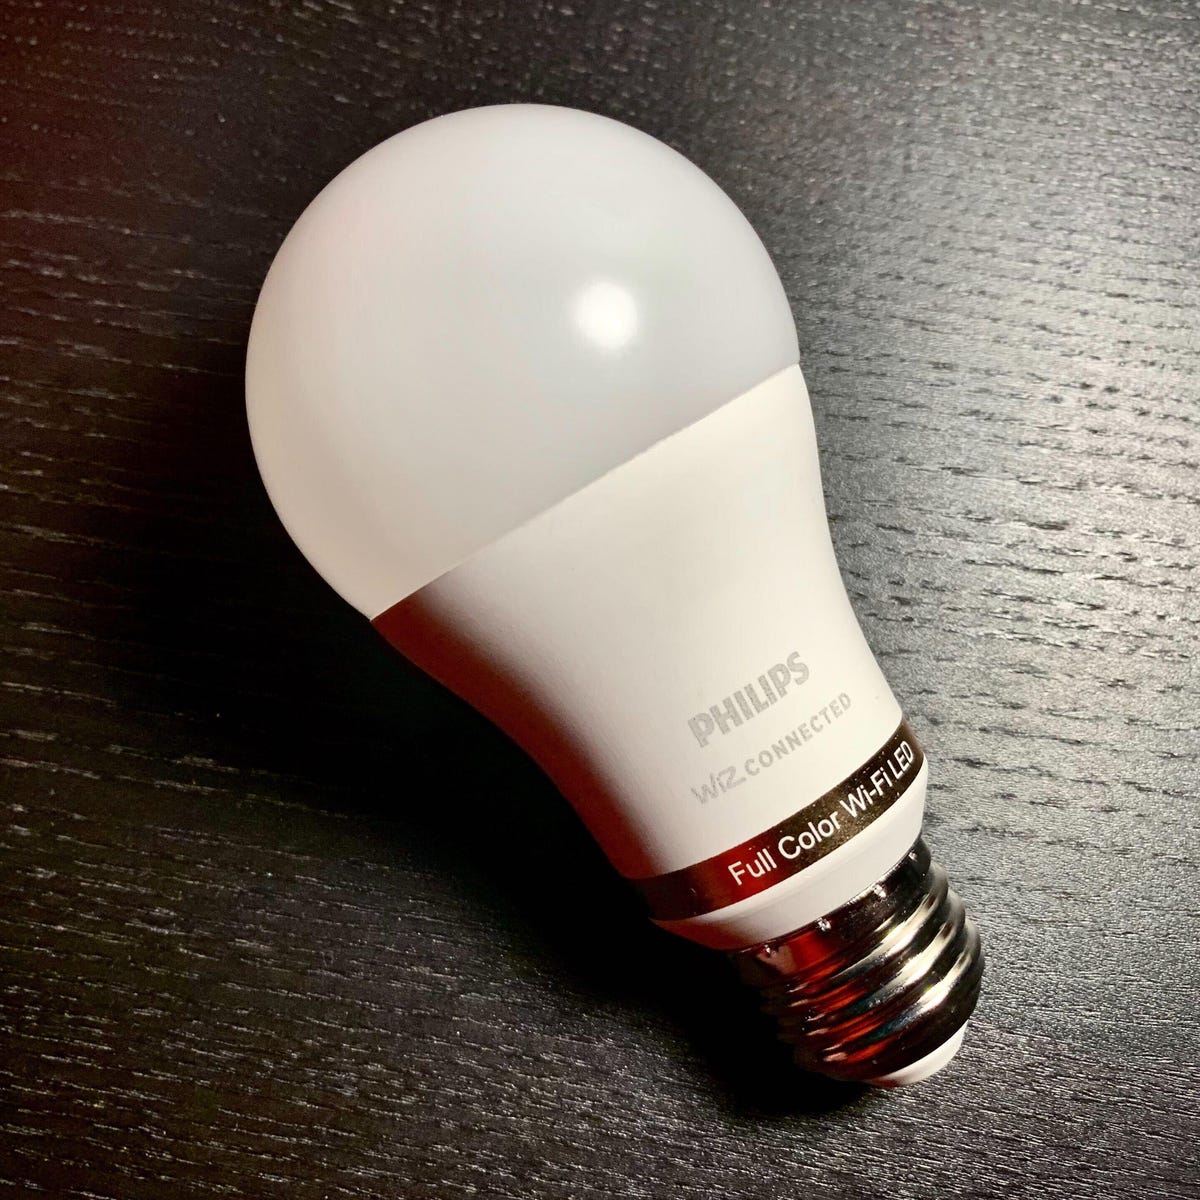 Philips Wiz Connected LED review: This color-changing smart bulb isn't  stupidly expensive - CNET